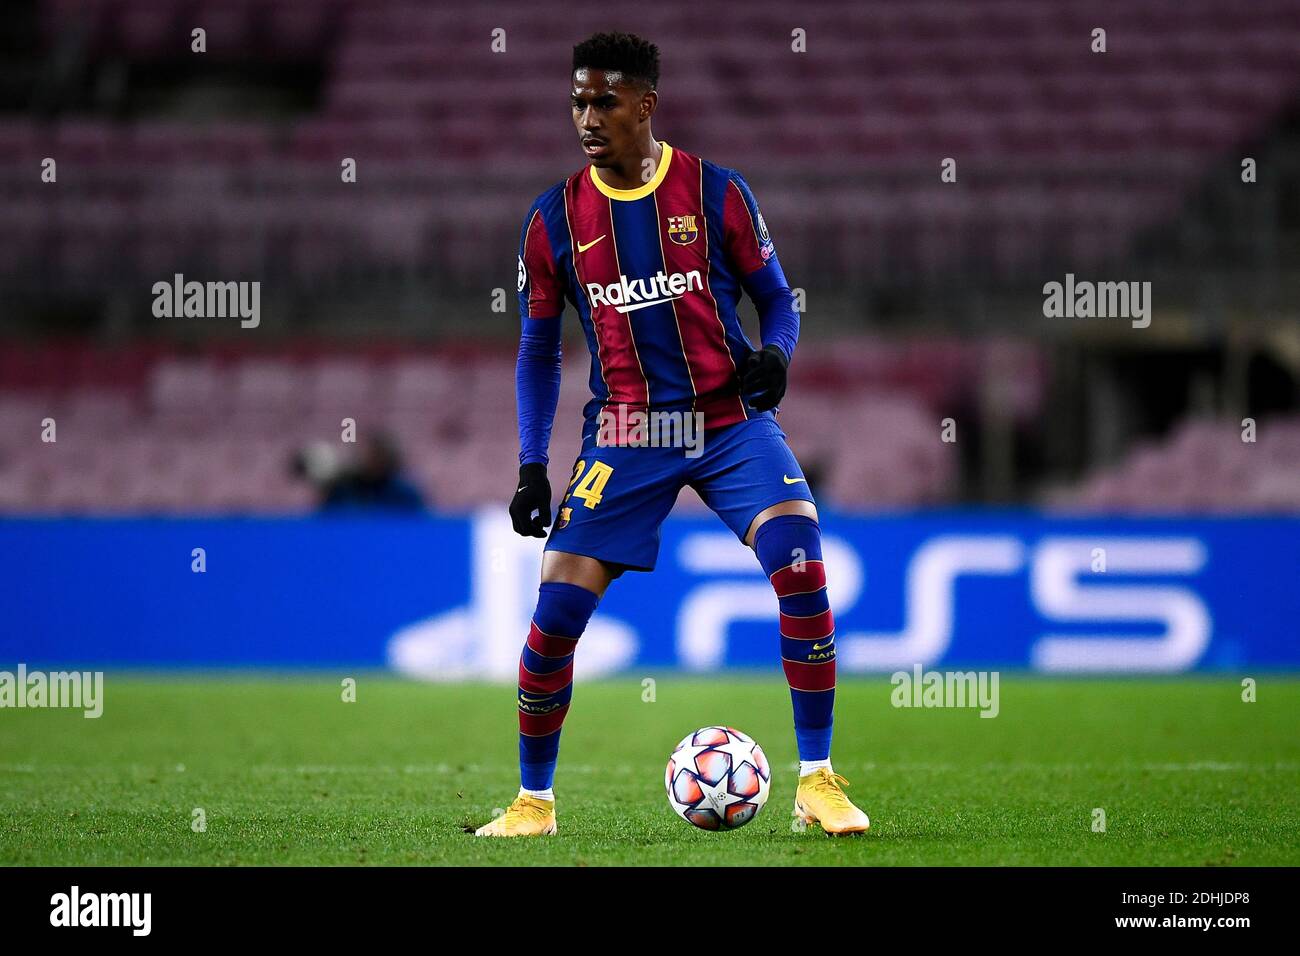 Barcelona, Spain - 08 December, 2020: Junior Firpo of FC Barcelona in action during the UEFA Champions League Group G football match between FC Barcelona and Juventus. Juventus FC won 3-0 over FC Barcelona. Credit: Nicolò Campo/Alamy Live News Stock Photo